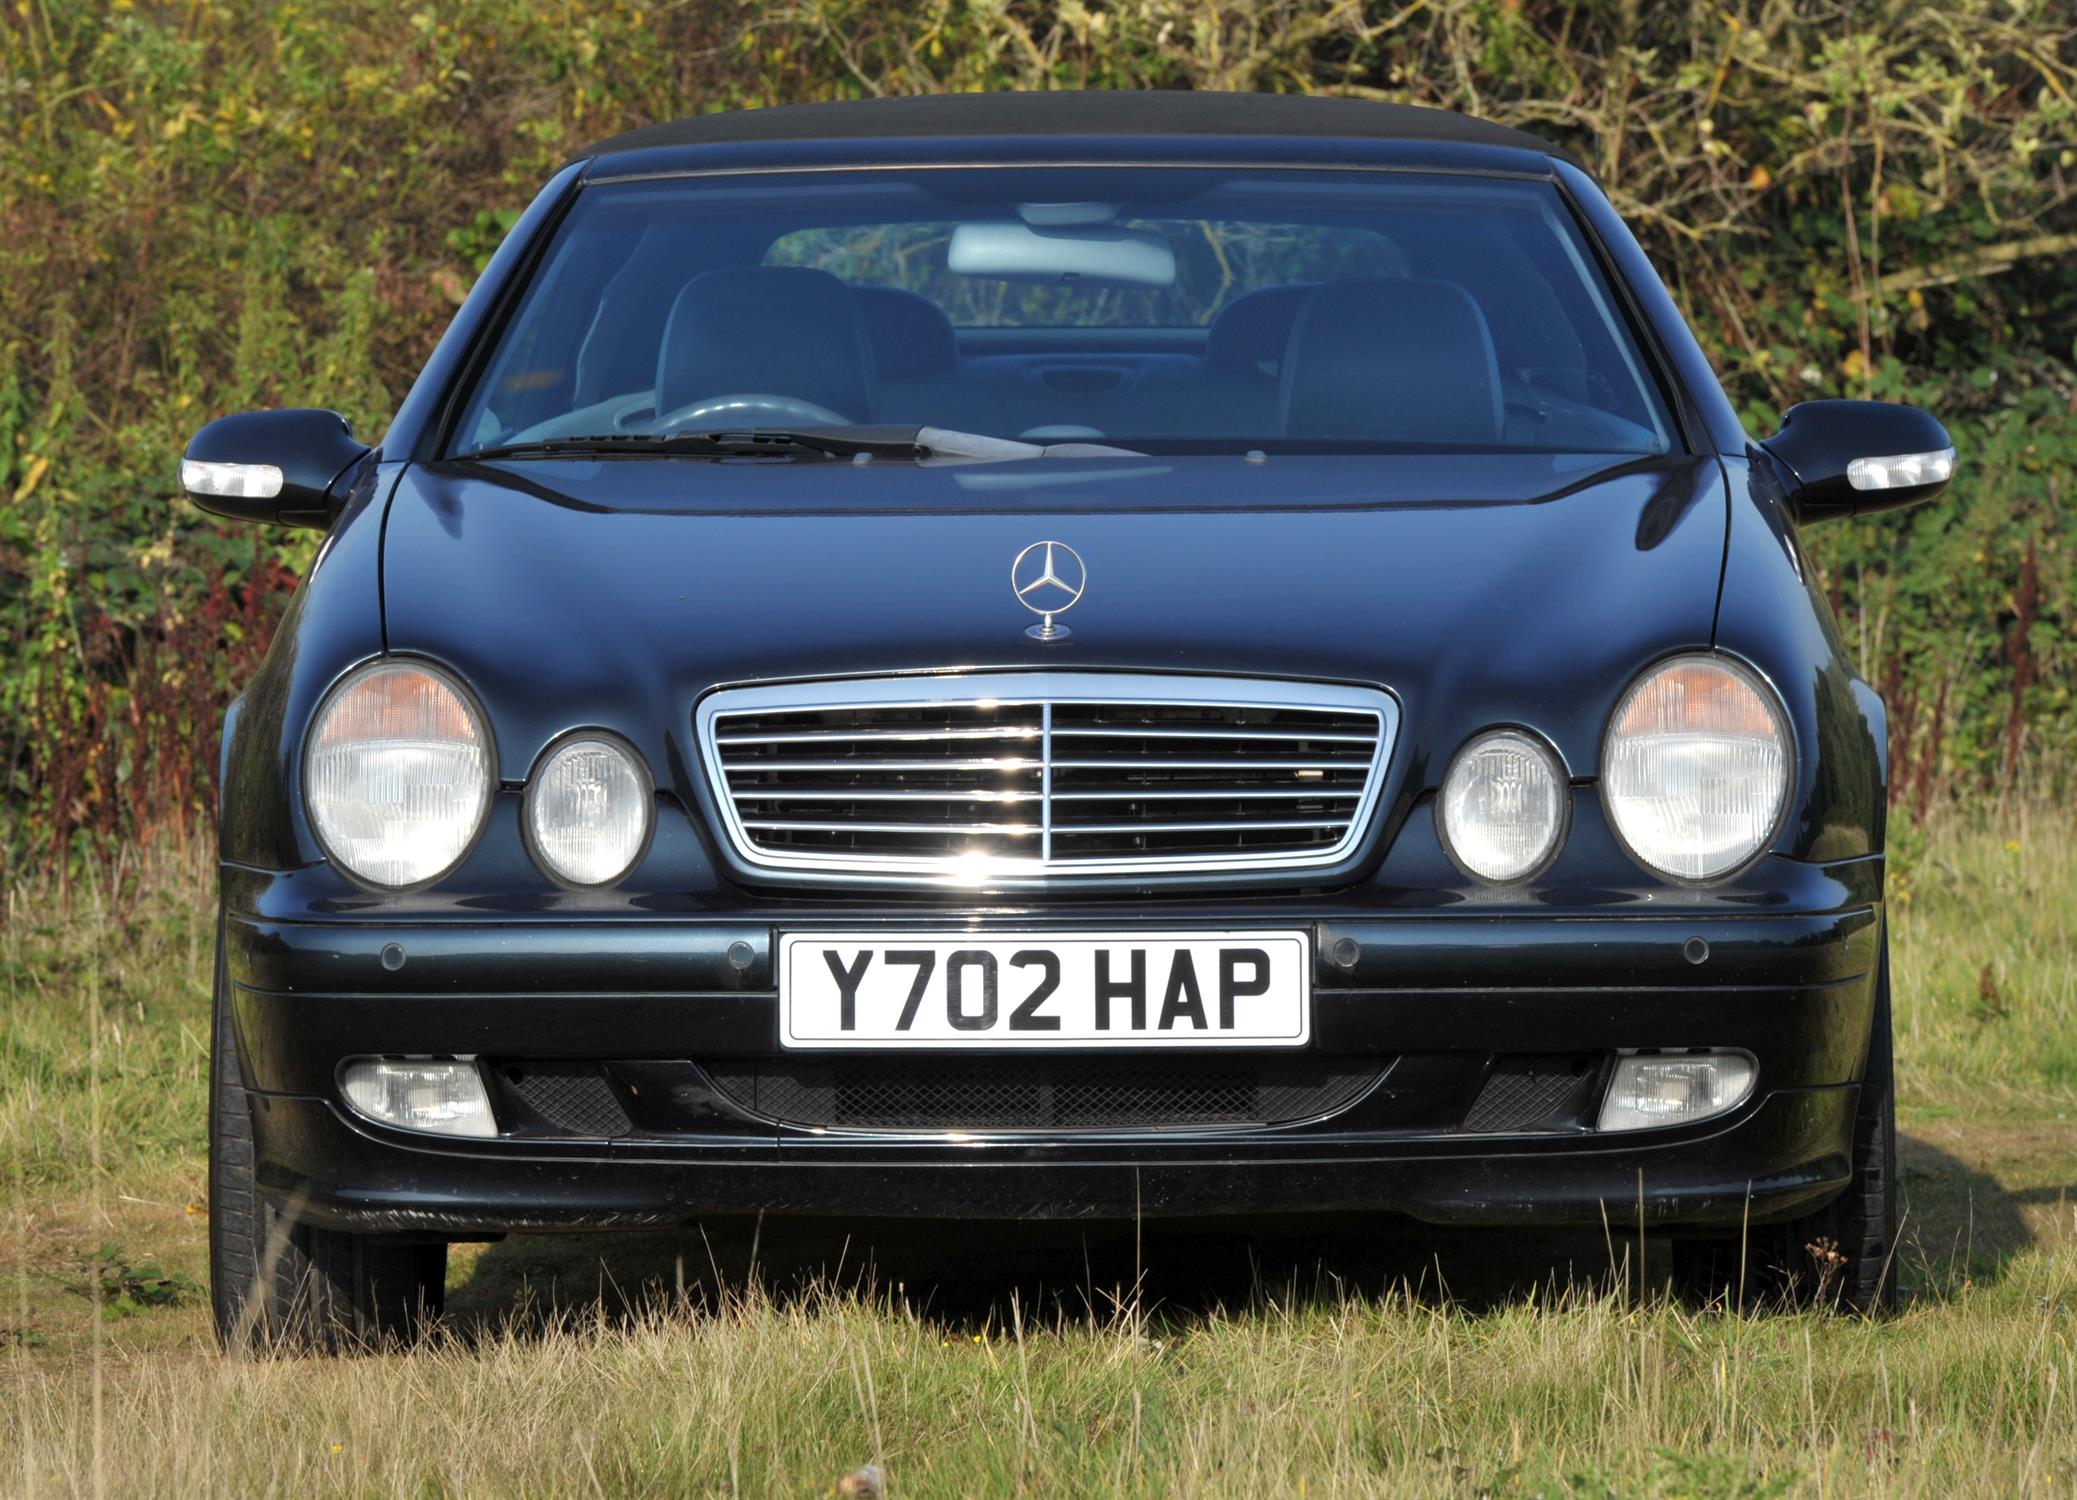 2001 Mercedes CLK 200 Petrol Convertible Automatic. Registration number: Y702 HAP. - Image 2 of 21